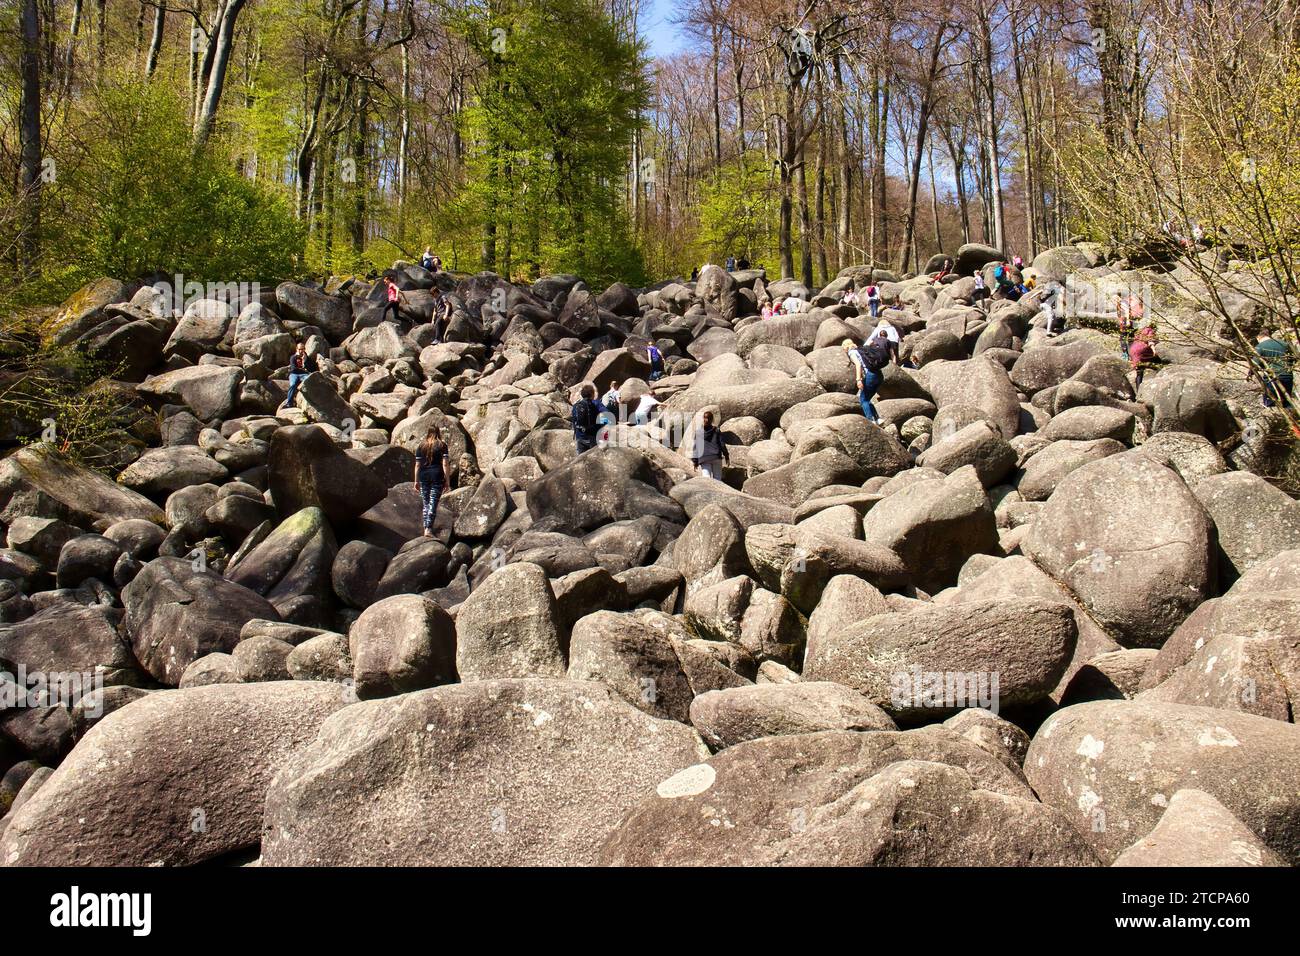 Lautertal, Germany - April 24, 2021: People climbing on large rocks on a hill at Felsenmeer on a spring day in Germany. Stock Photo